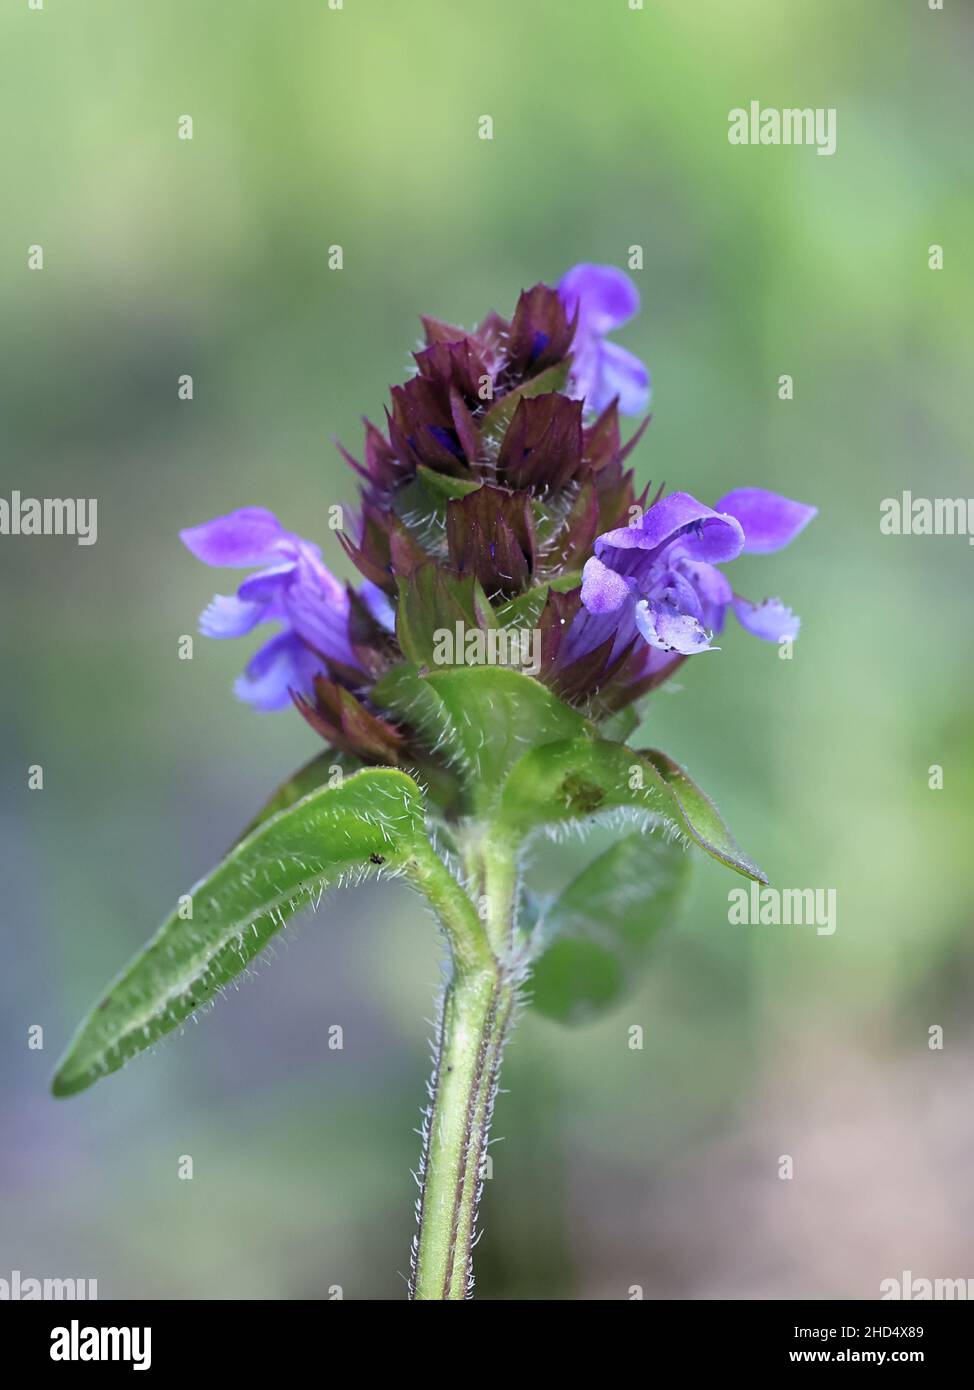 Prunella vulgaris, commonly known as Self-heal, Heal-all, Heart-of-the-earth or  Woundwort, wild flowering plant from Finland Stock Photo